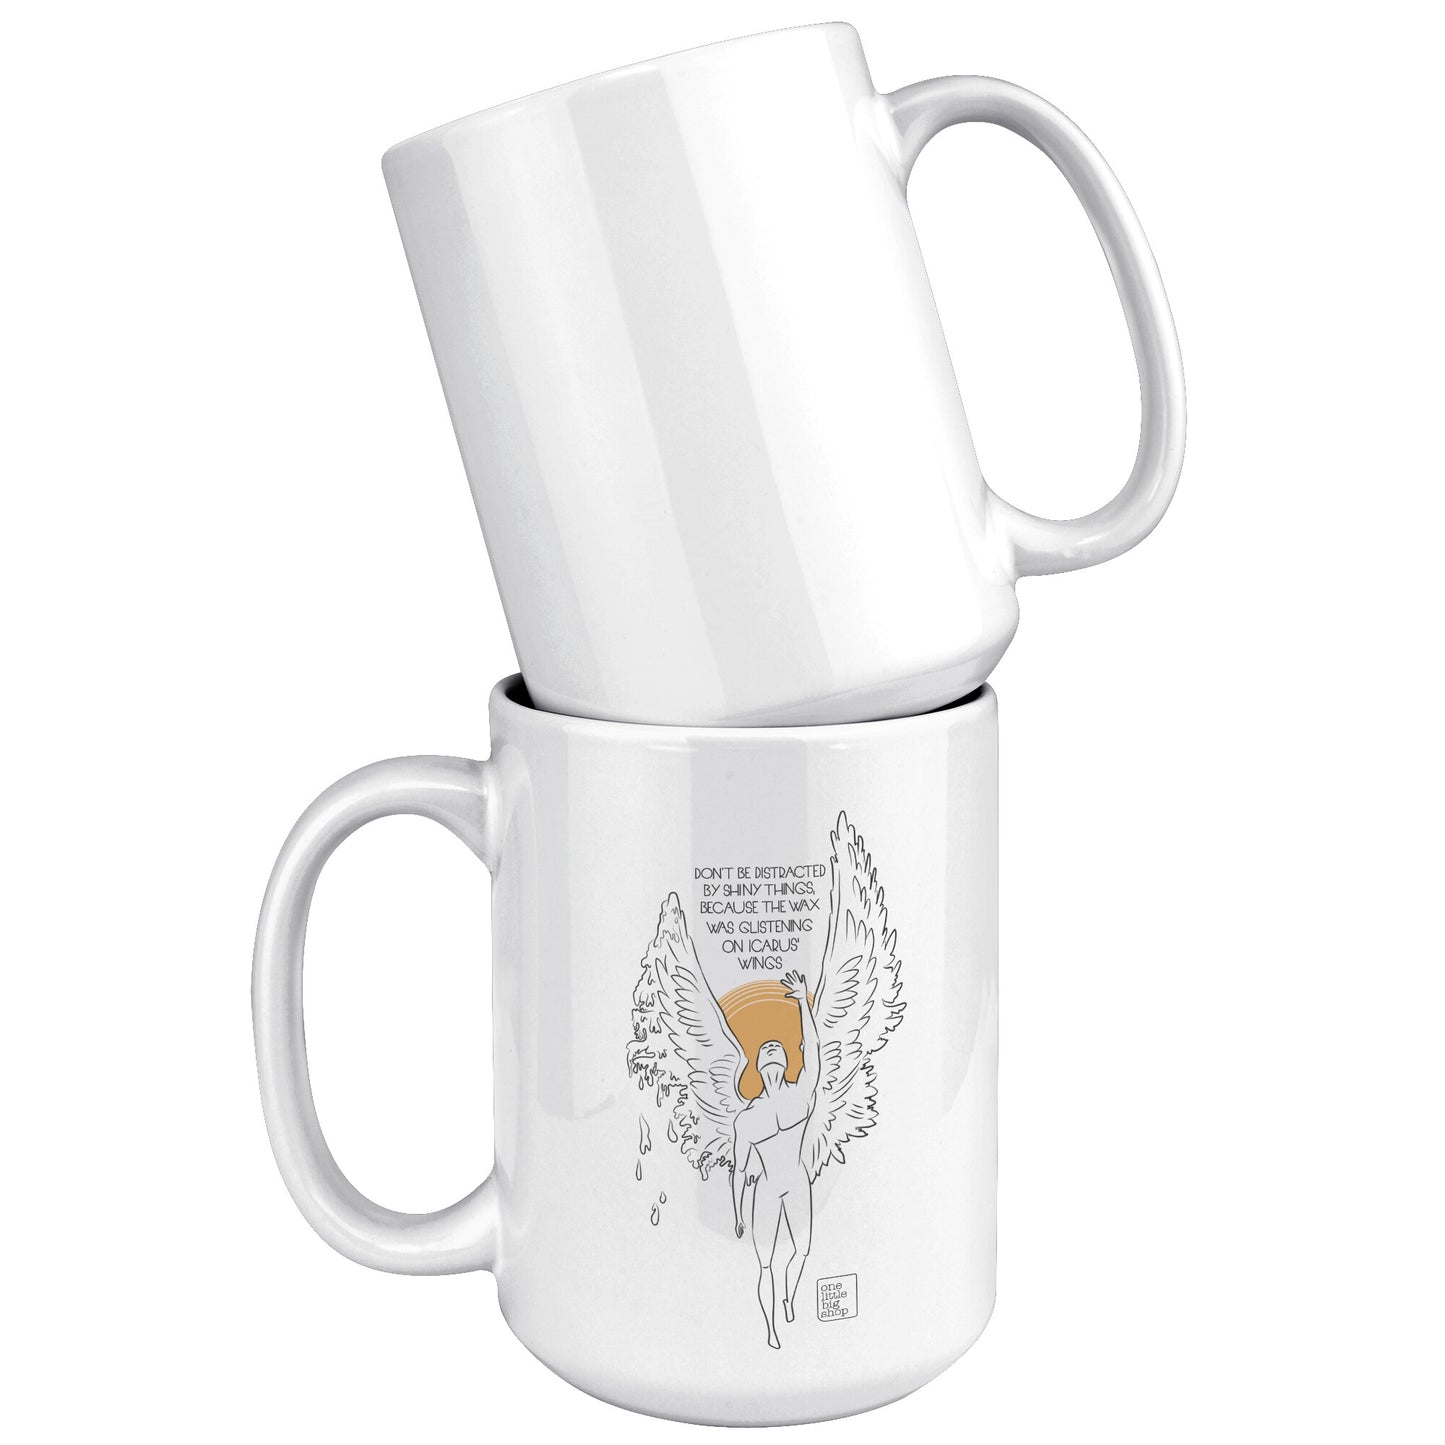 15oz White Ceramic Mug with Melting Icarus Design and Quote, Microwave and Dishwasher Safe